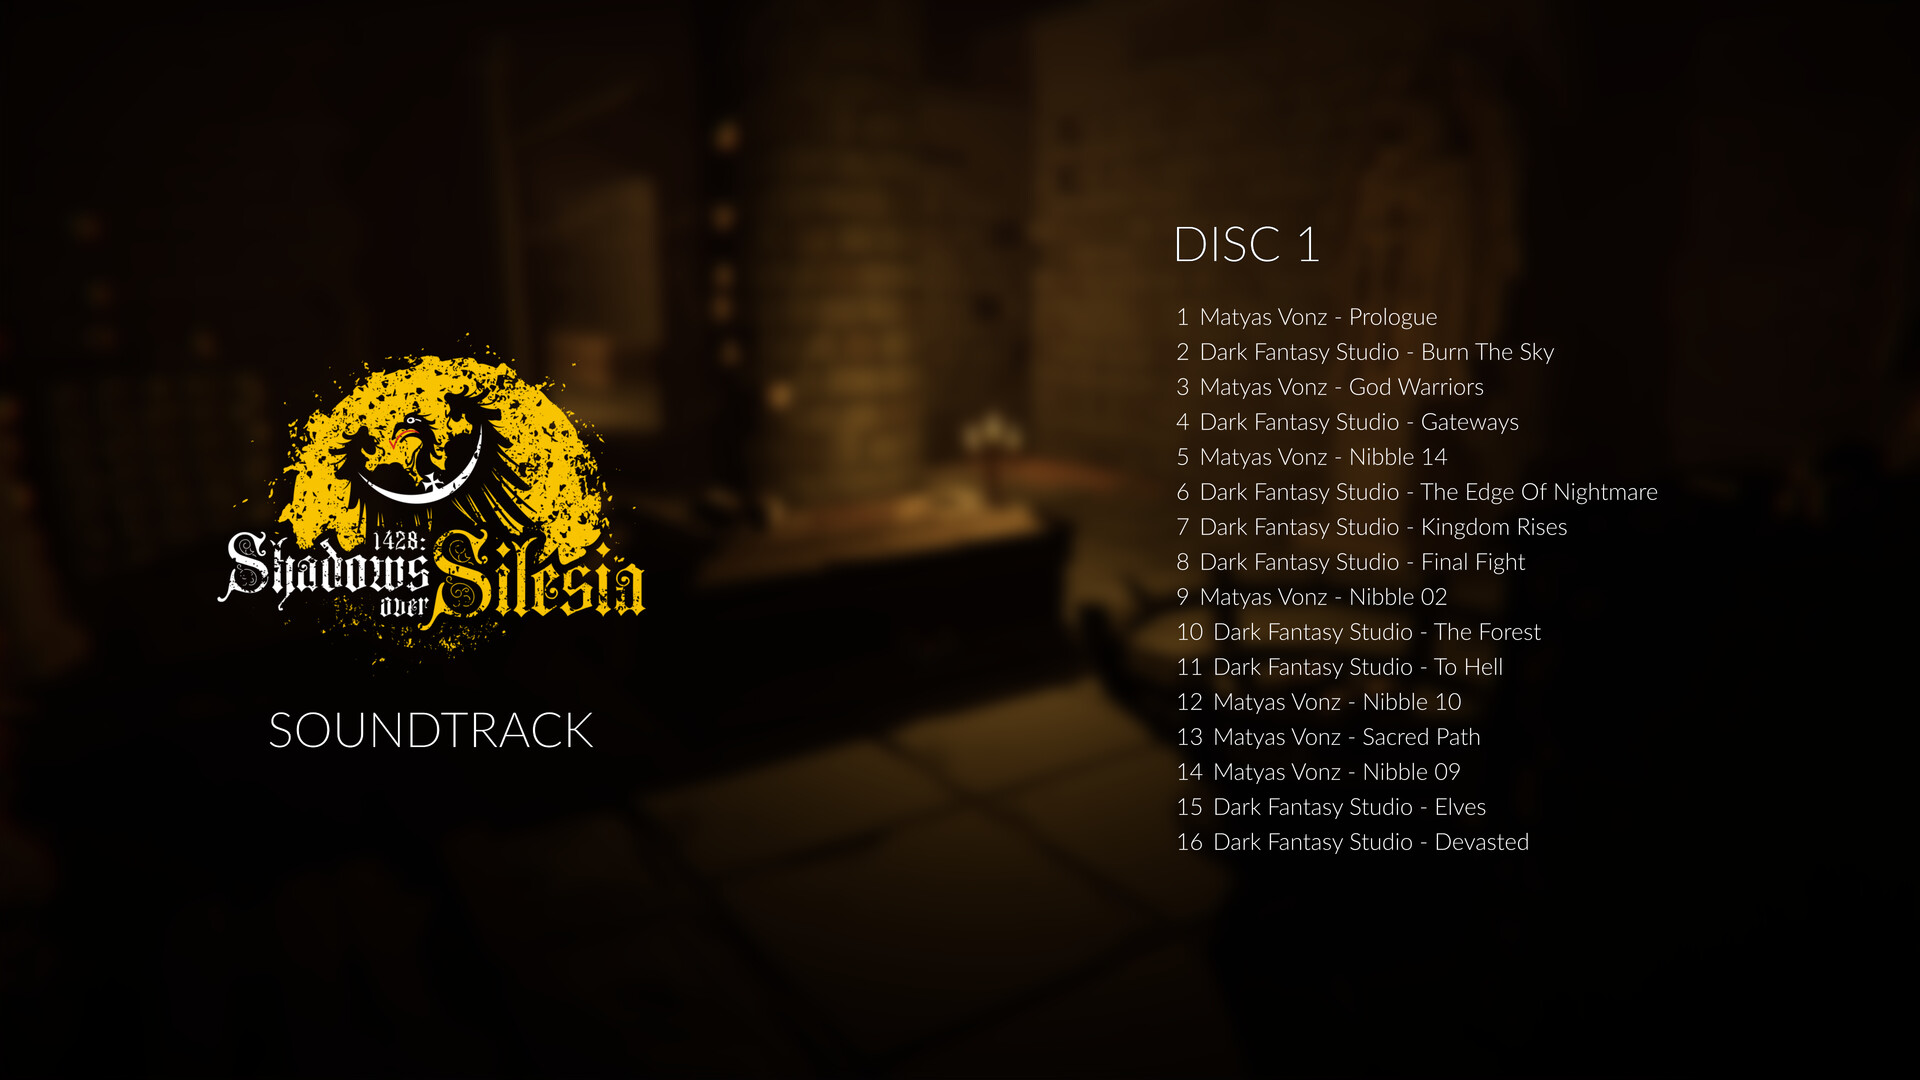 1428: Shadows over Silesia - Soundtrack Featured Screenshot #1